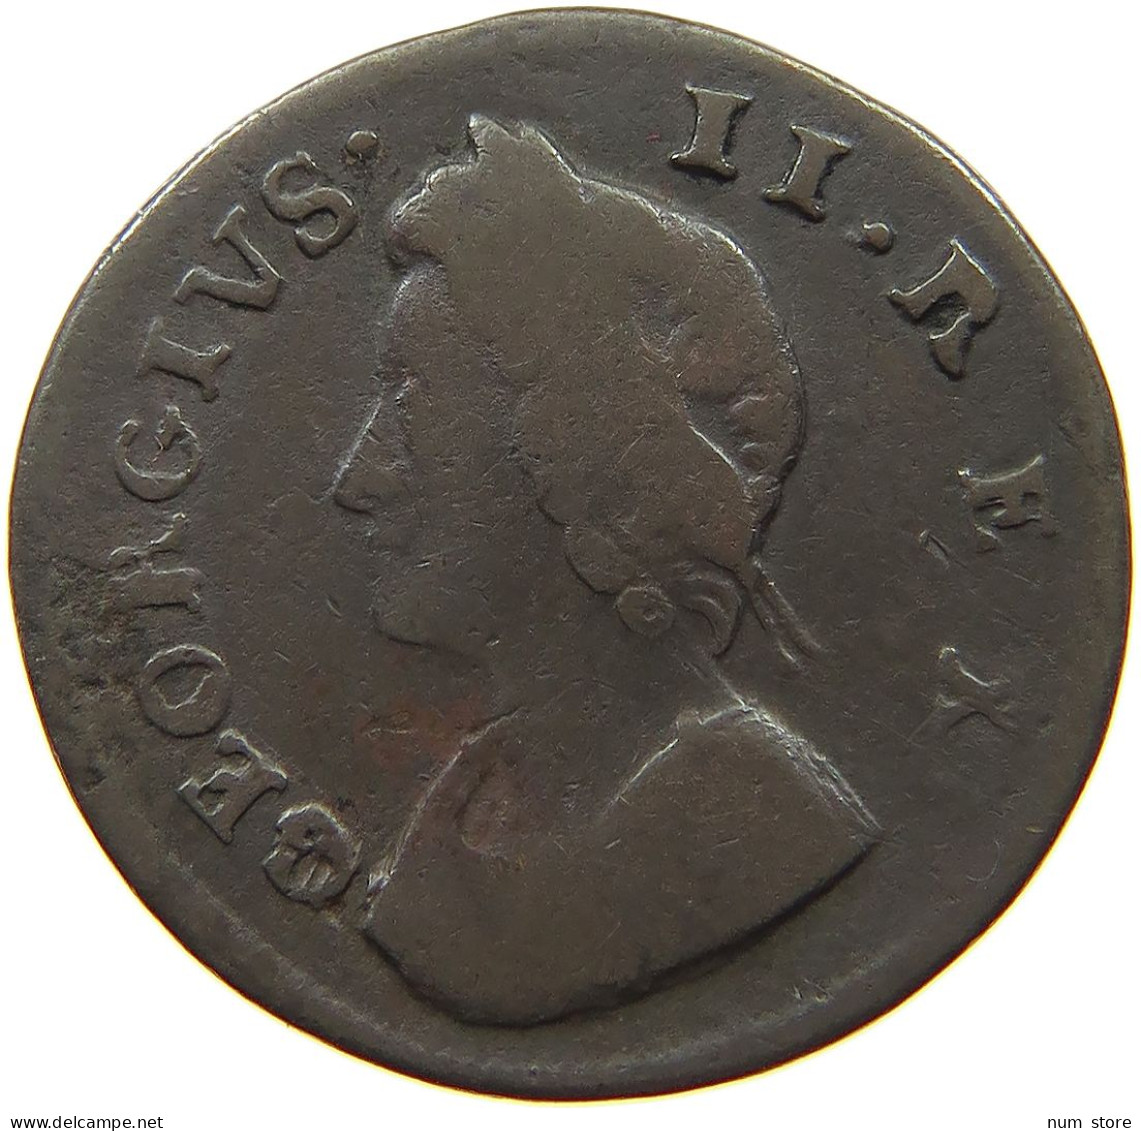 GREAT BRITAIN FARTHING 1737 George II. 1727-1760. #t149 0205 - A. 1 Farthing